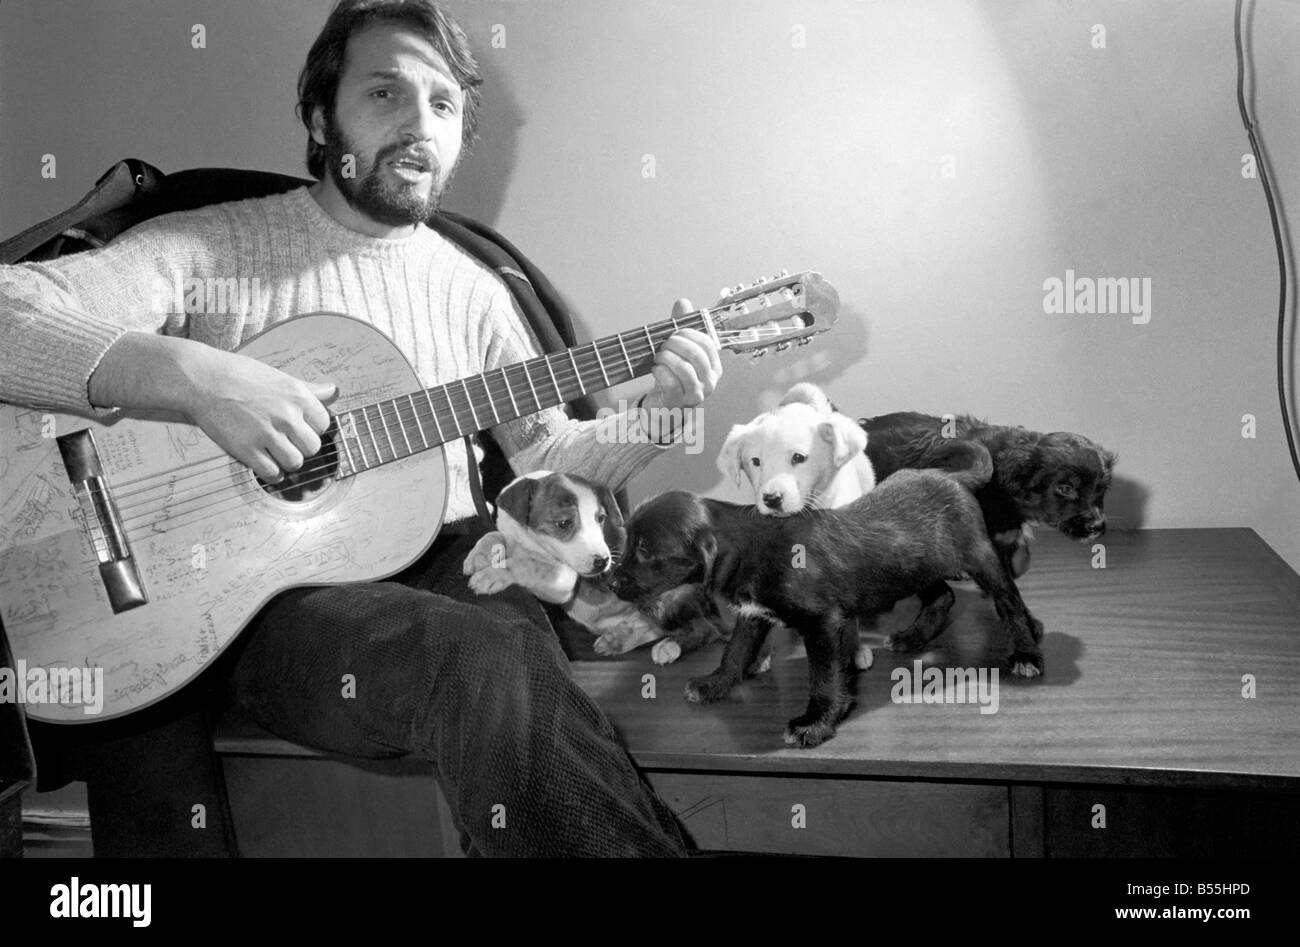 Salvatore Sangiorgi Italian singer and guitarist seen here at the RSPCA Home and Clinic Trenmare Gardens, London, singing to a pair of abandoned dogs December 1969 Z11924-003 Stock Photo